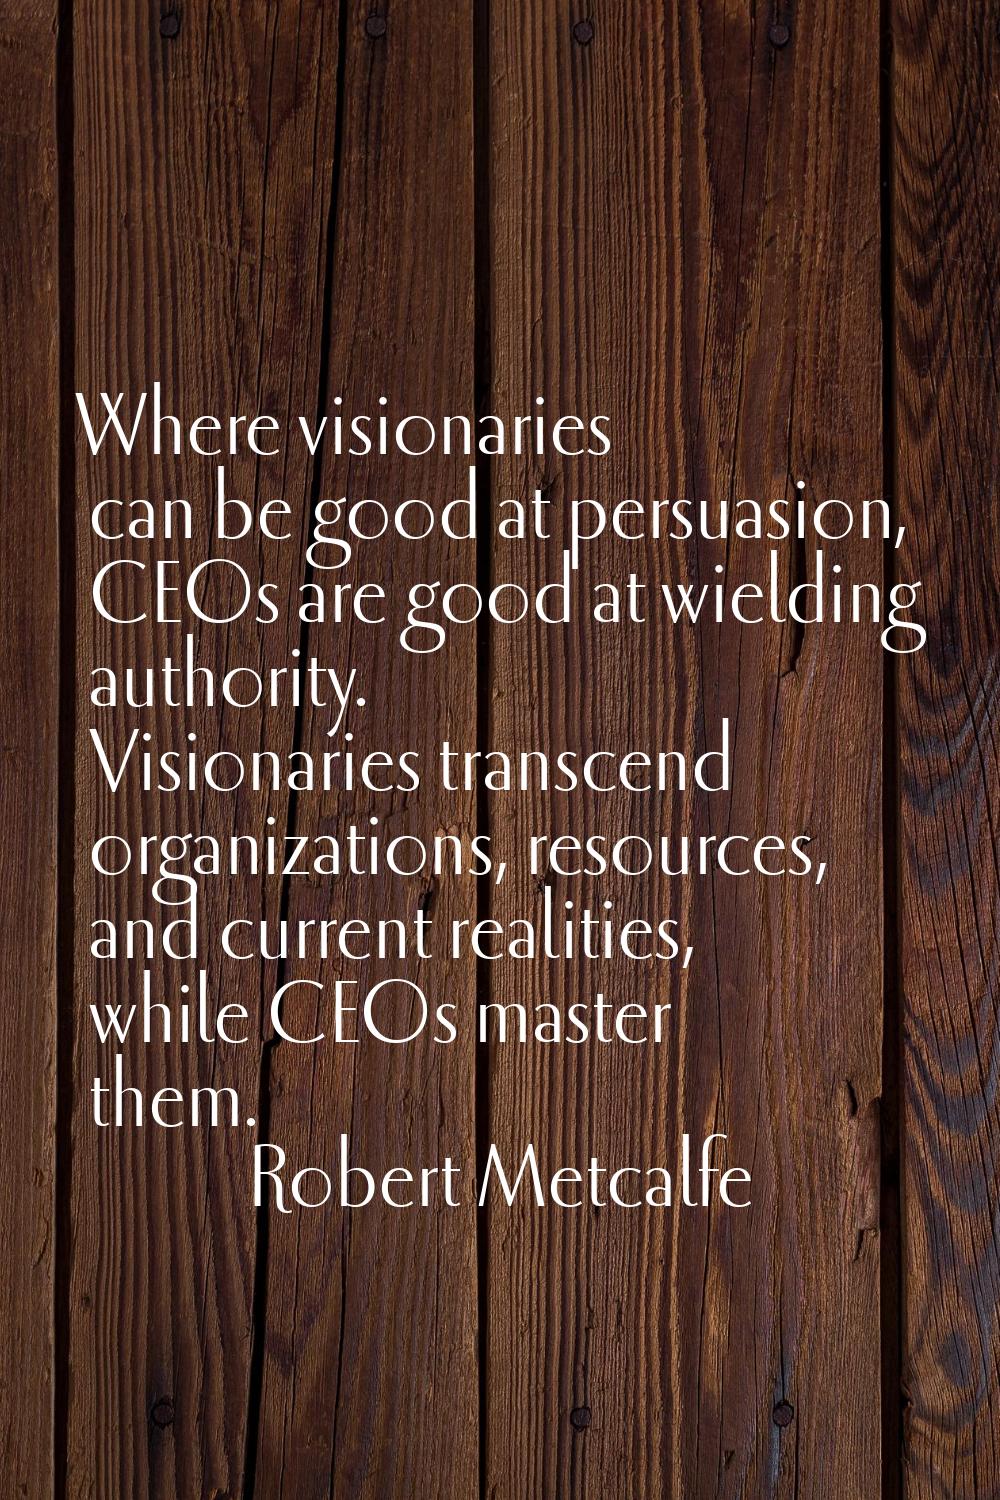 Where visionaries can be good at persuasion, CEOs are good at wielding authority. Visionaries trans